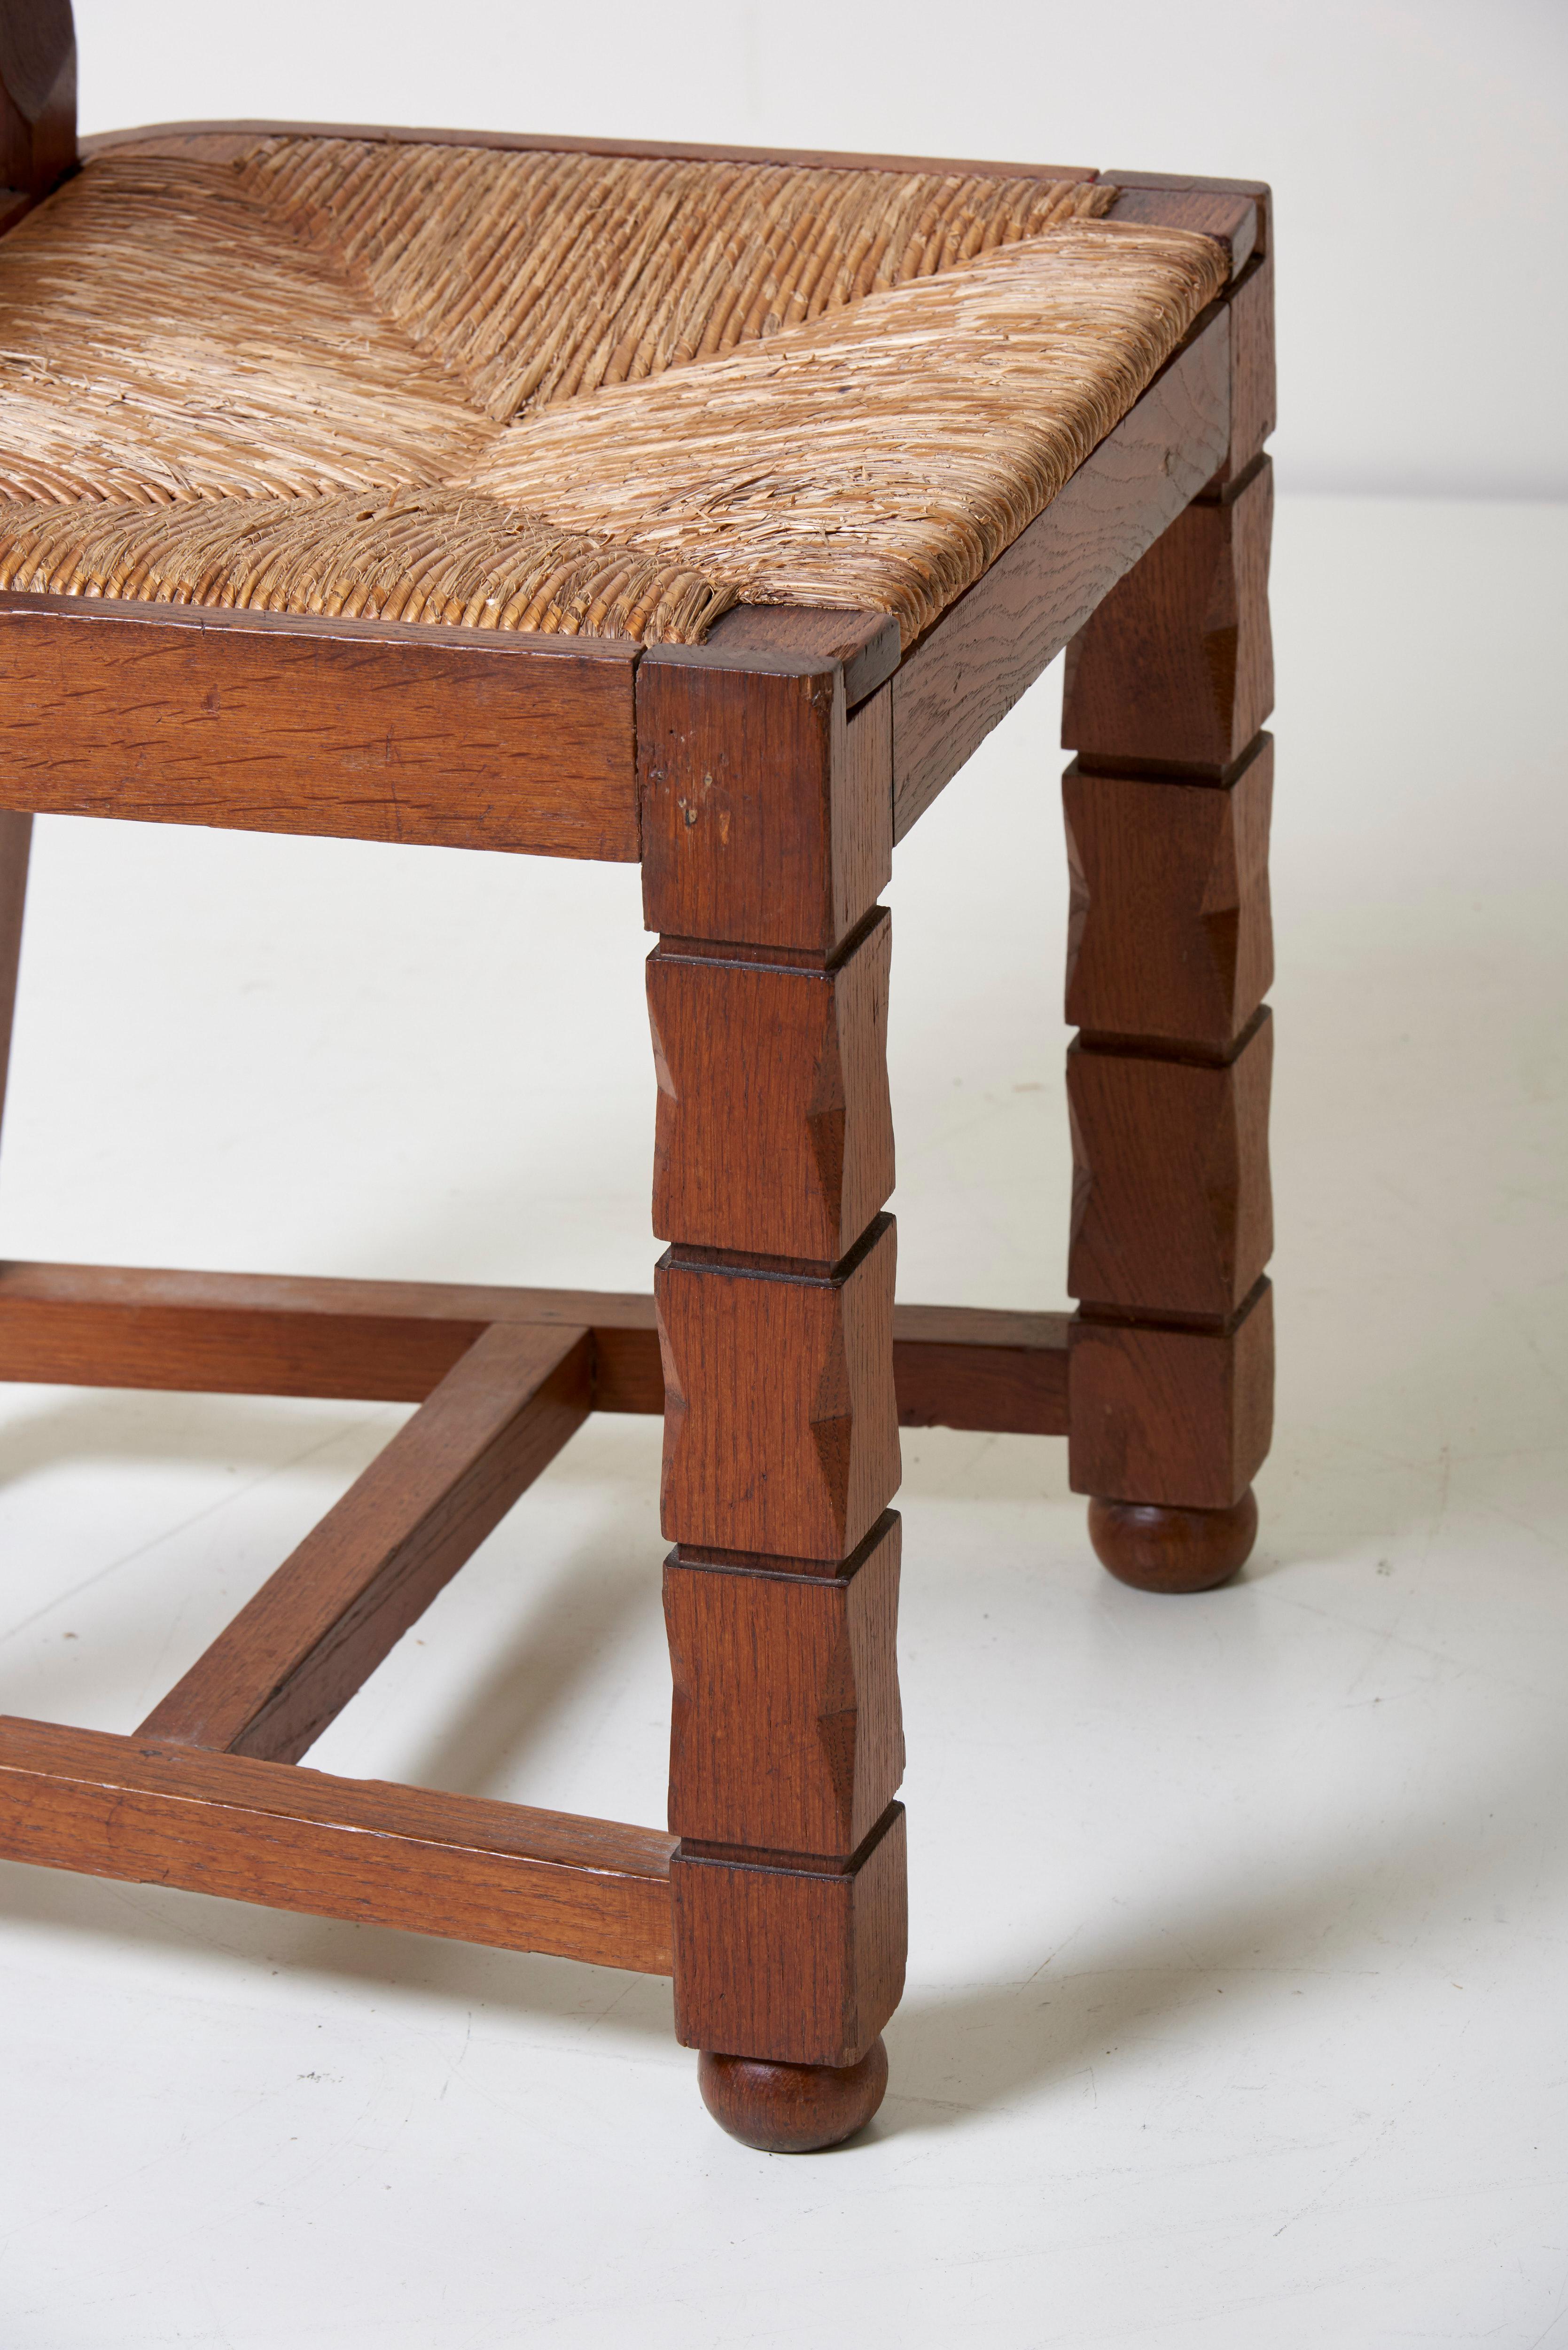 Set of Six Wooden Chairs by Jacques Mottheau, France, 1930s For Sale 4